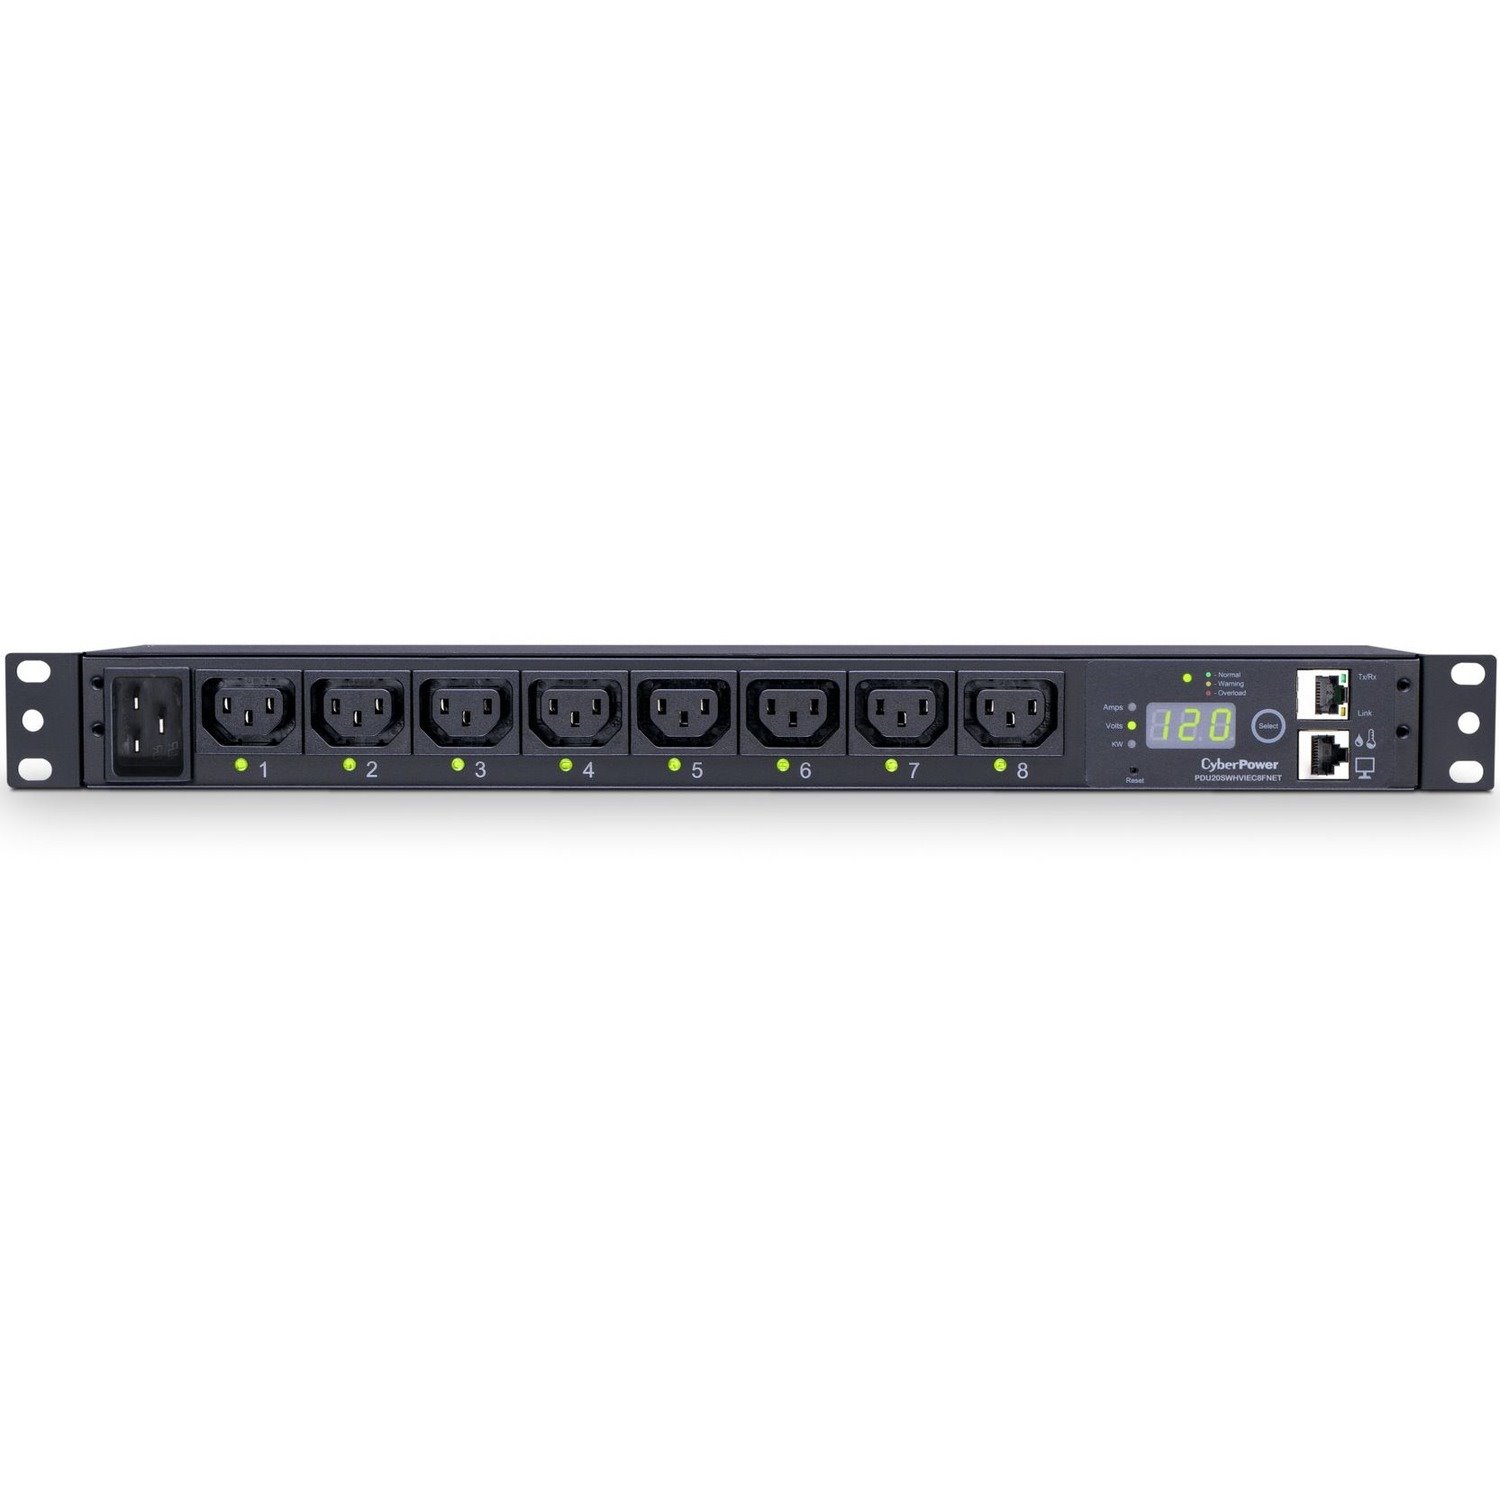 CyberPower PDU20SWHVIEC8FNET 200 - 240 VAC 20A Switched